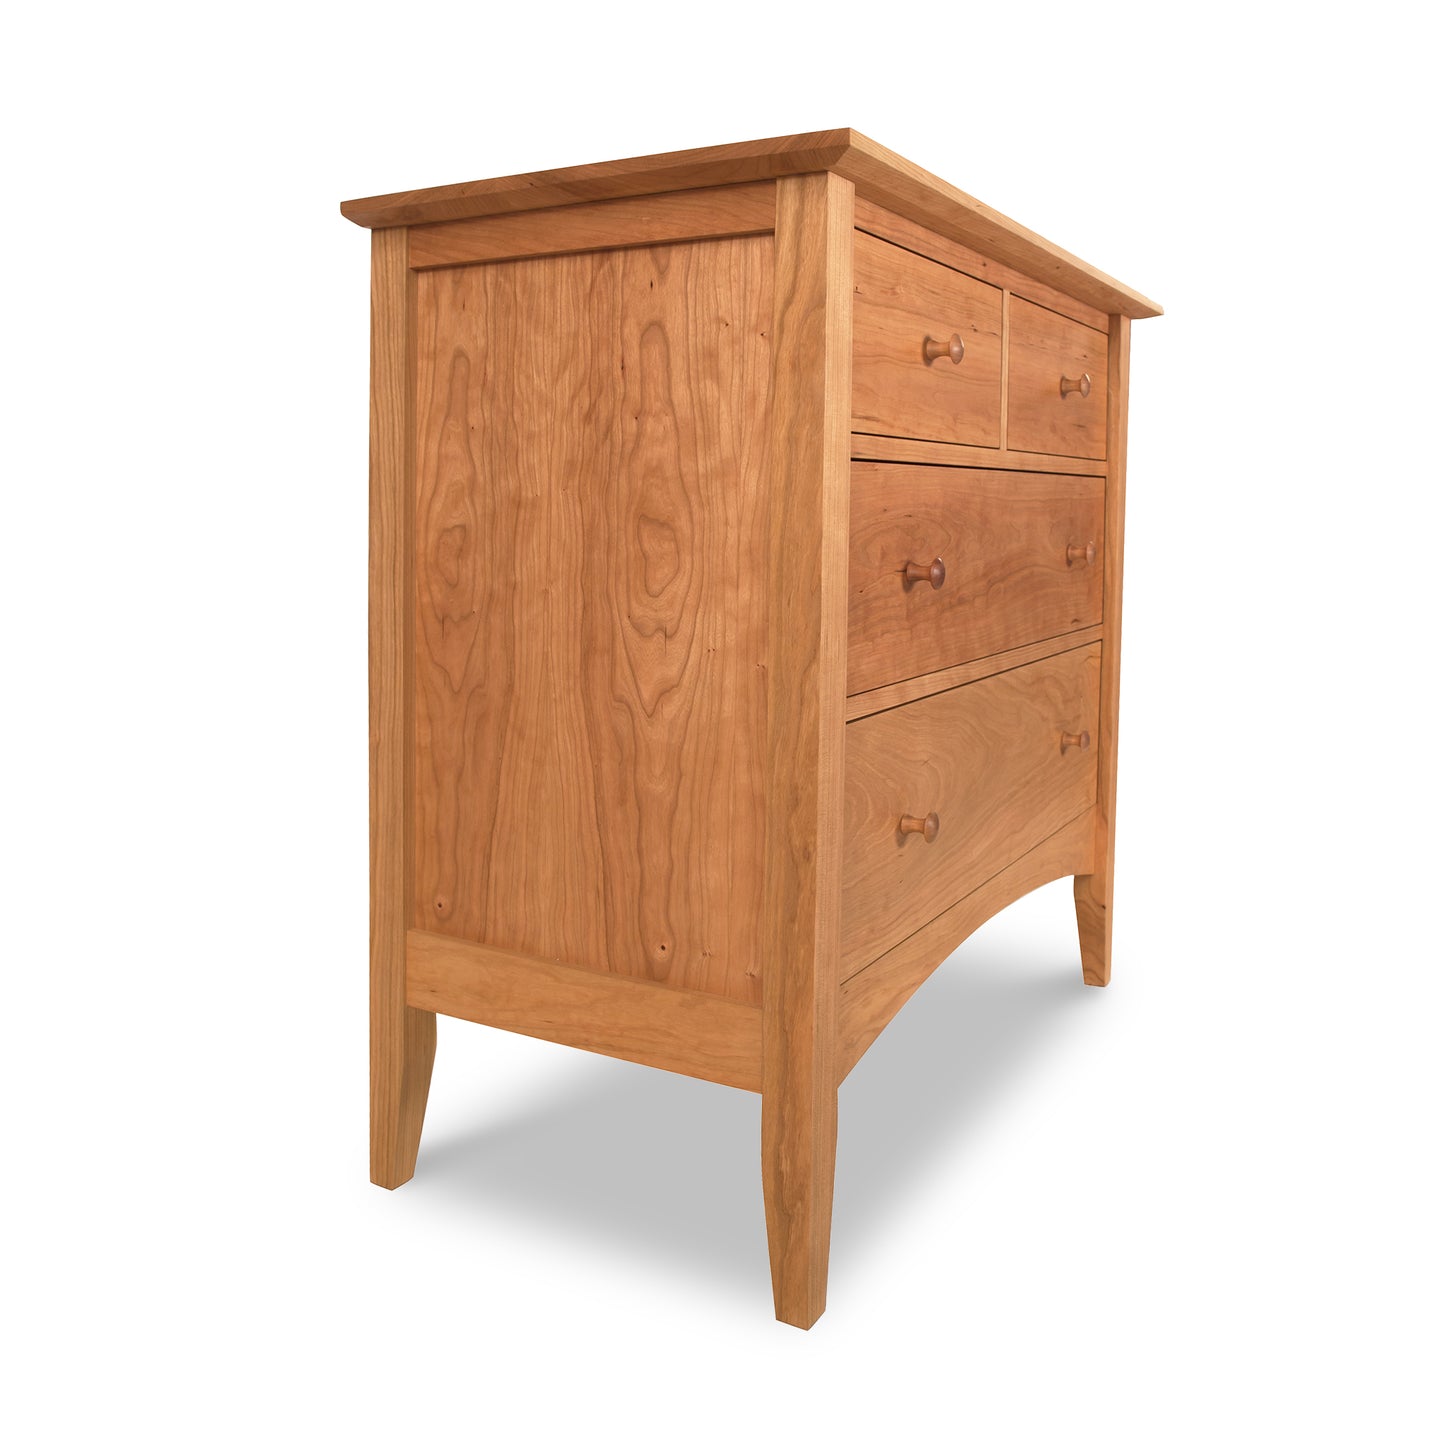 An American Shaker 4-Drawer Chest by Maple Corner Woodworks on a white background.